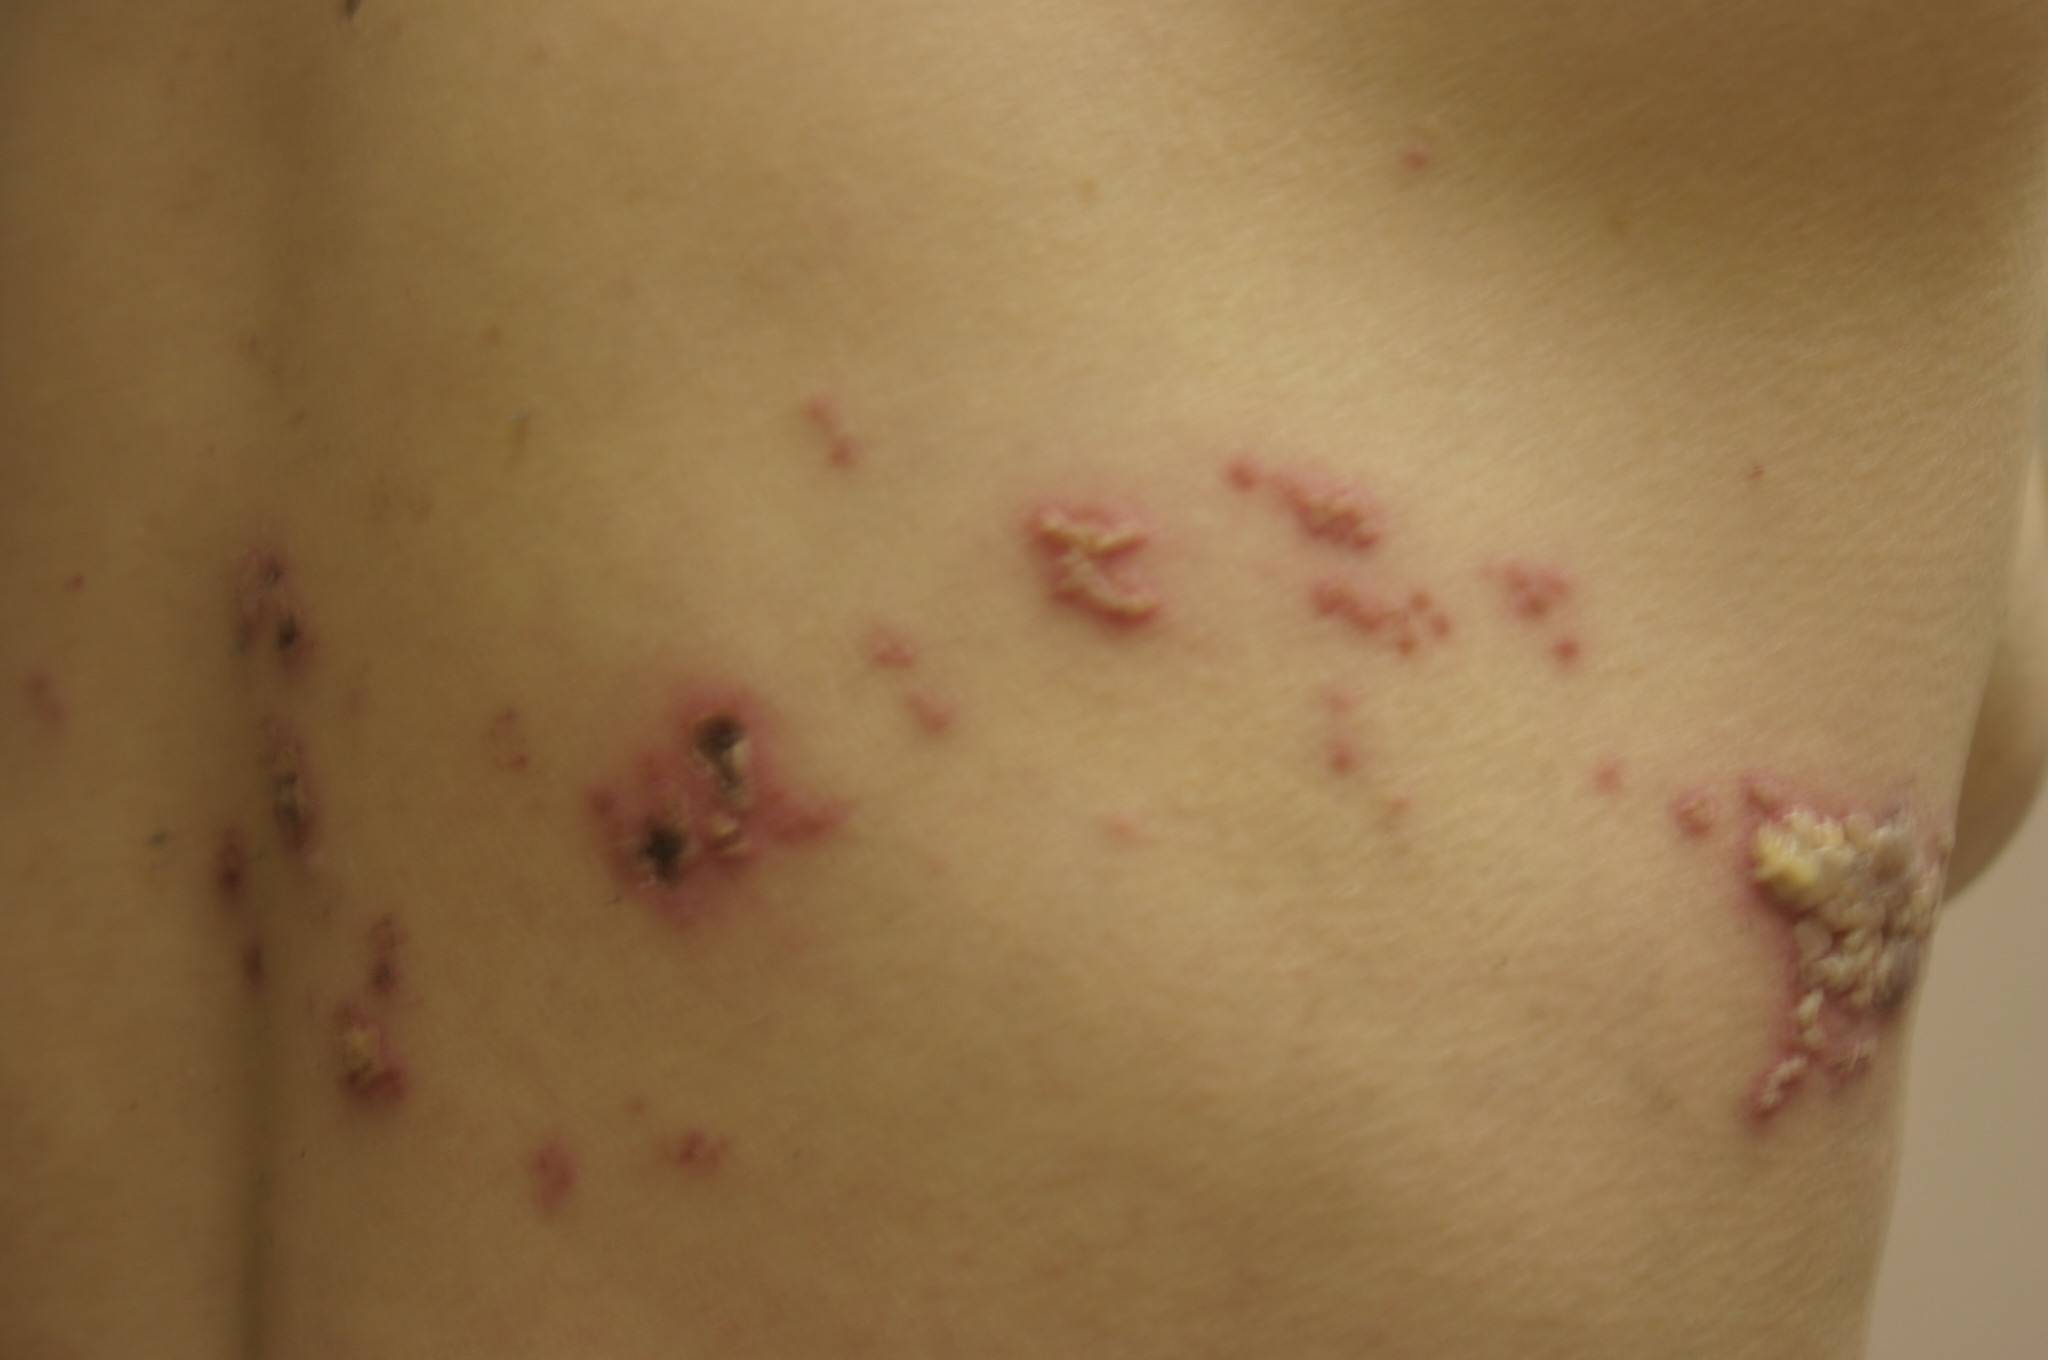 Herpes zoster agudo y neuralgia post herpetica